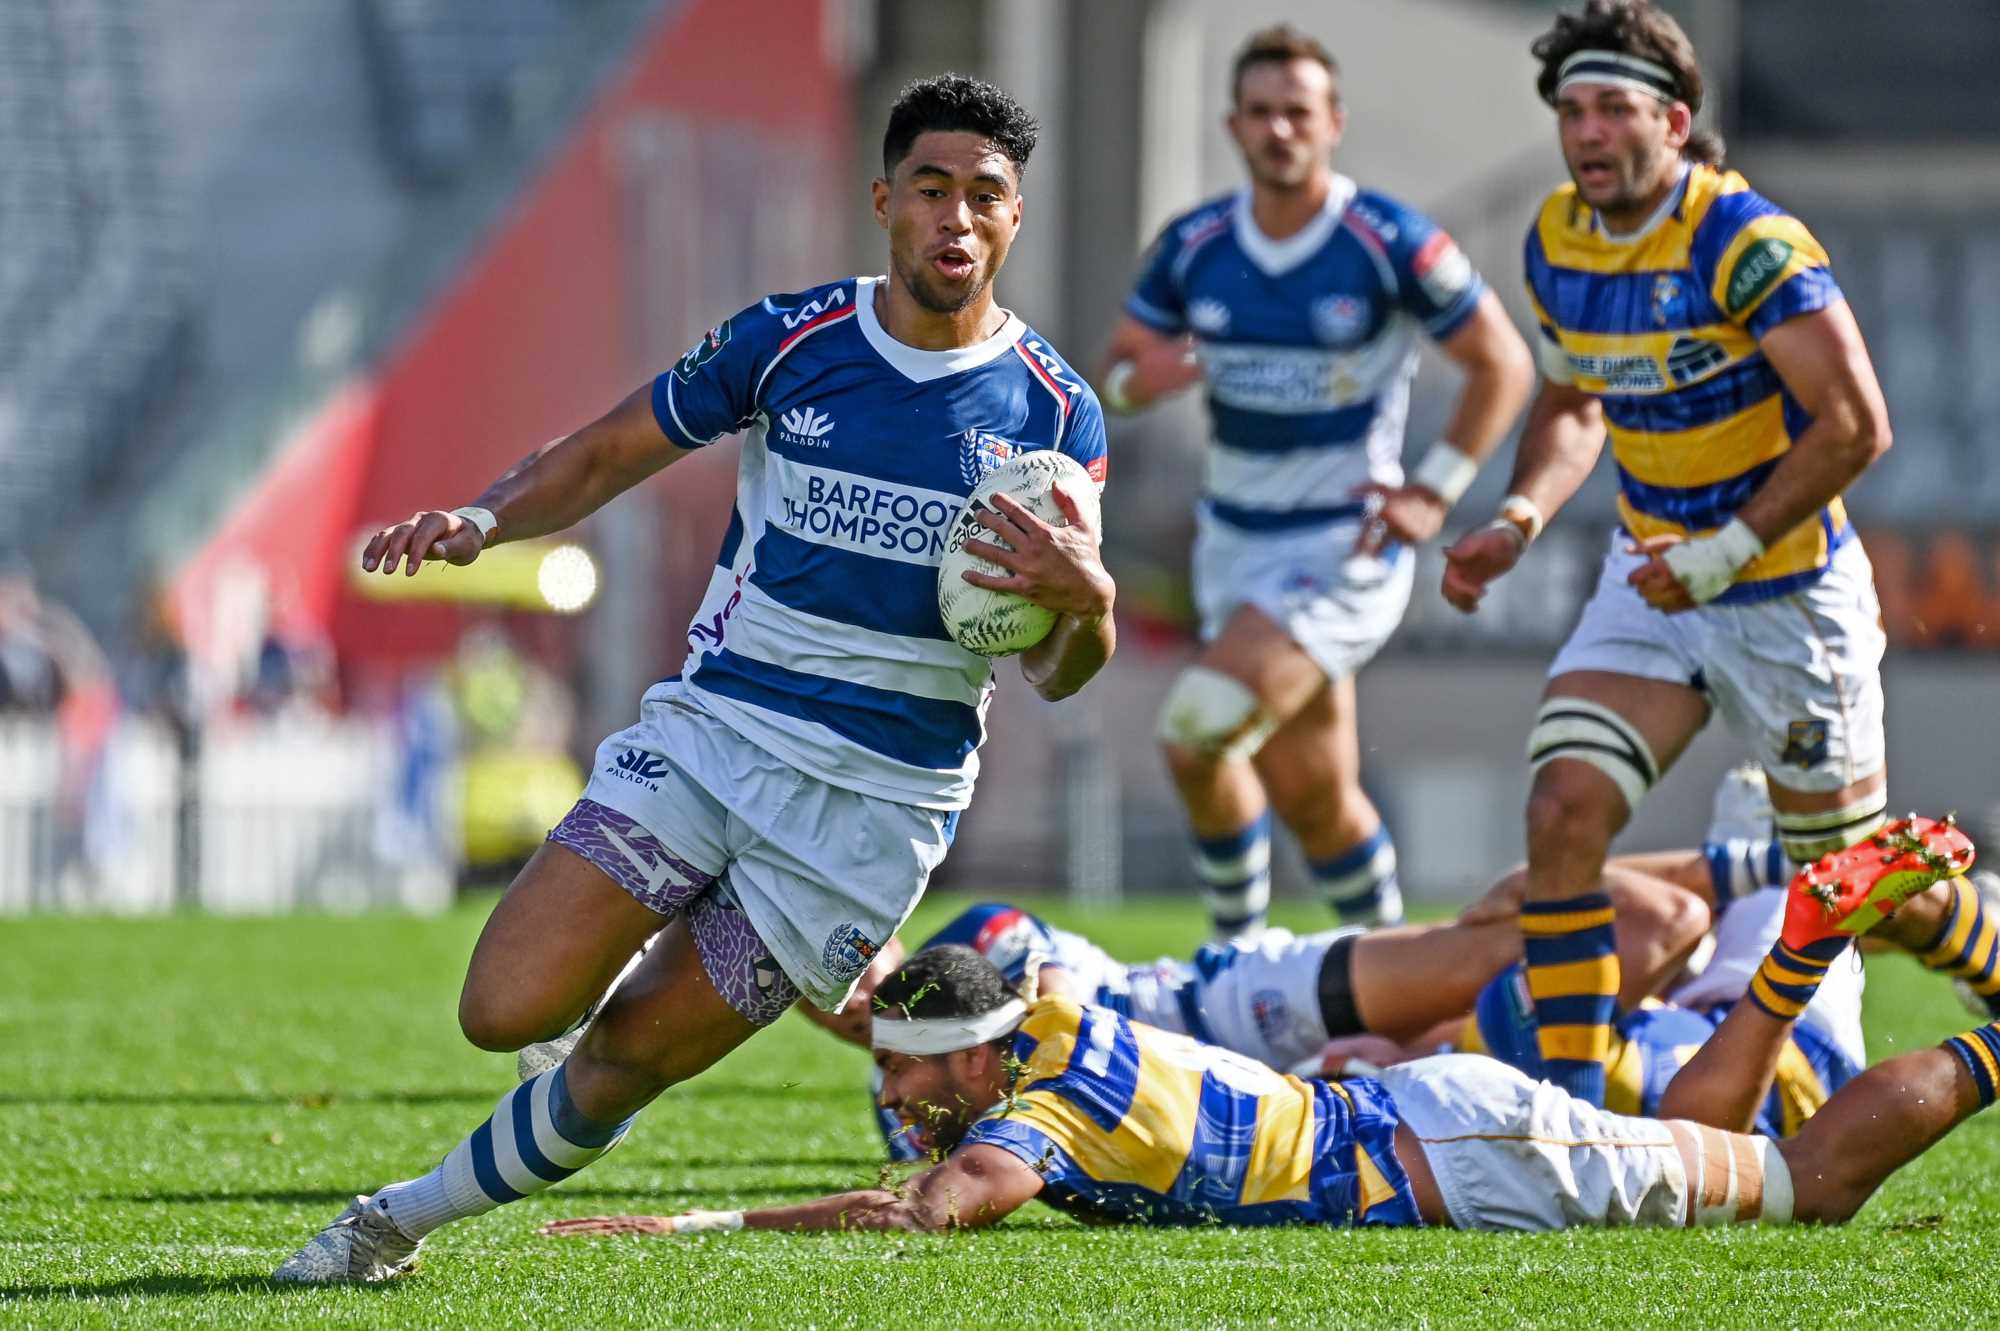 Auckland and Otago battle for the Lyn Colling Trophy at Eden Park